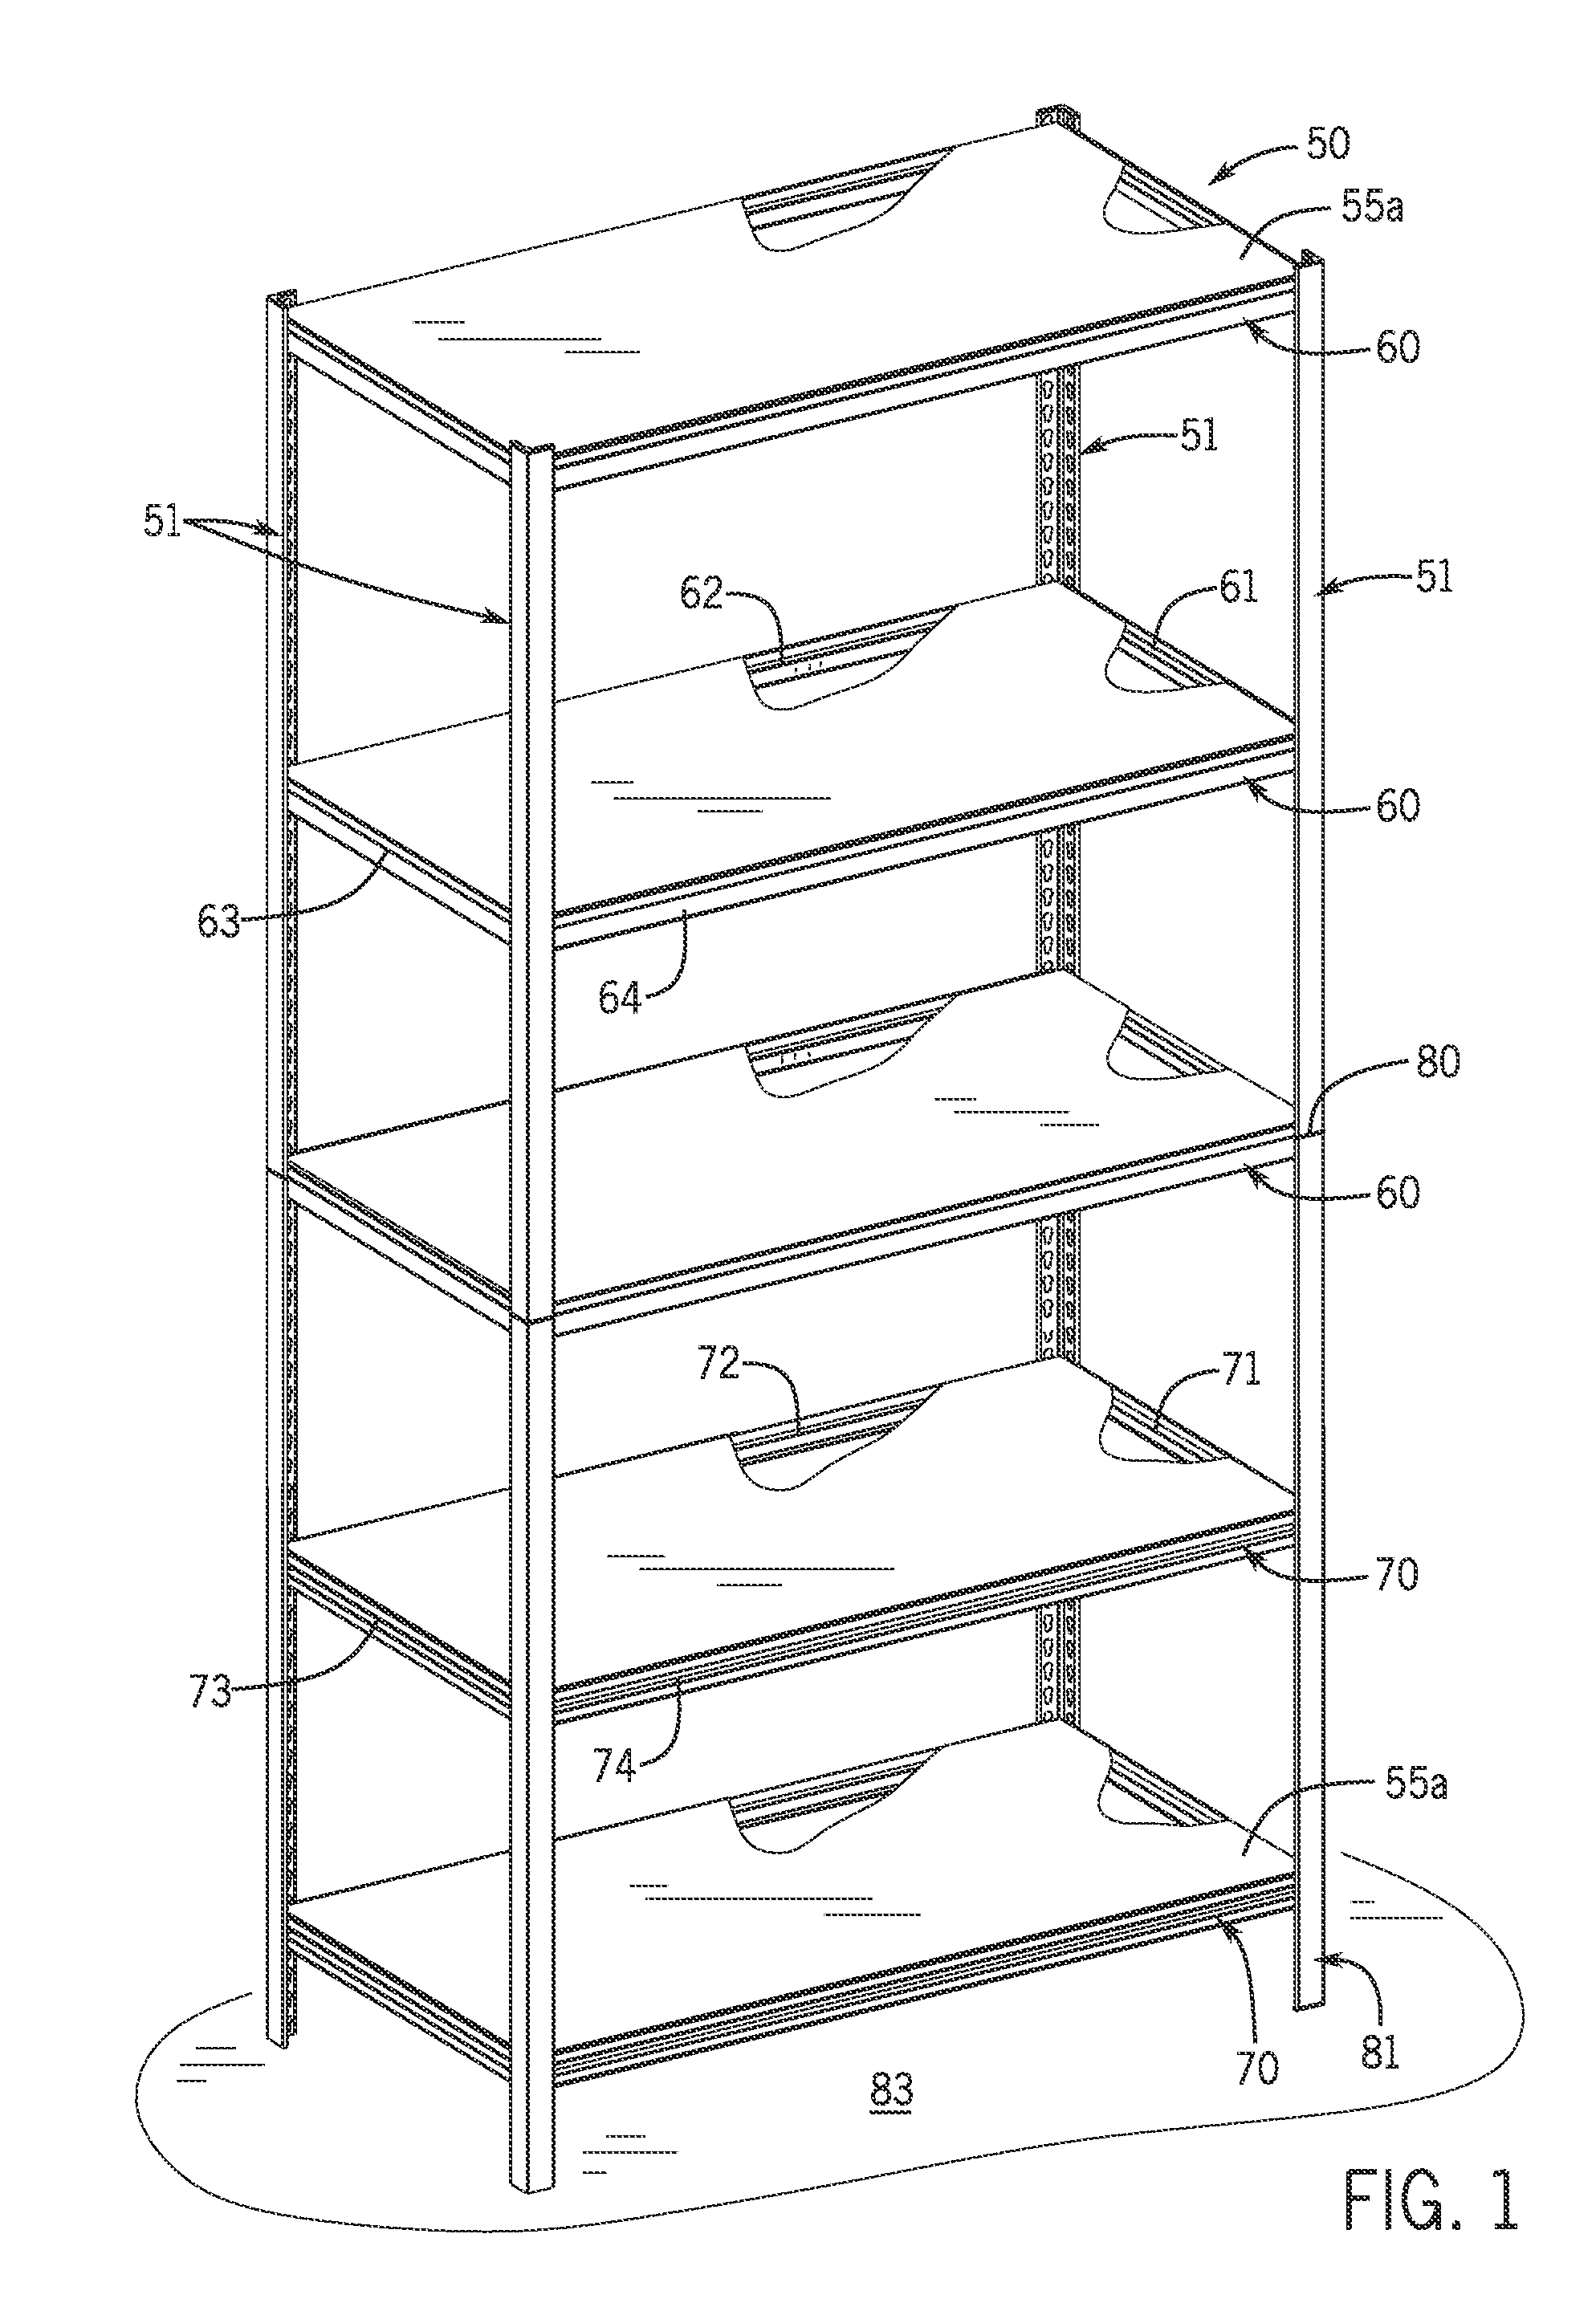 Shelving System Having Improved Structural Characteristics